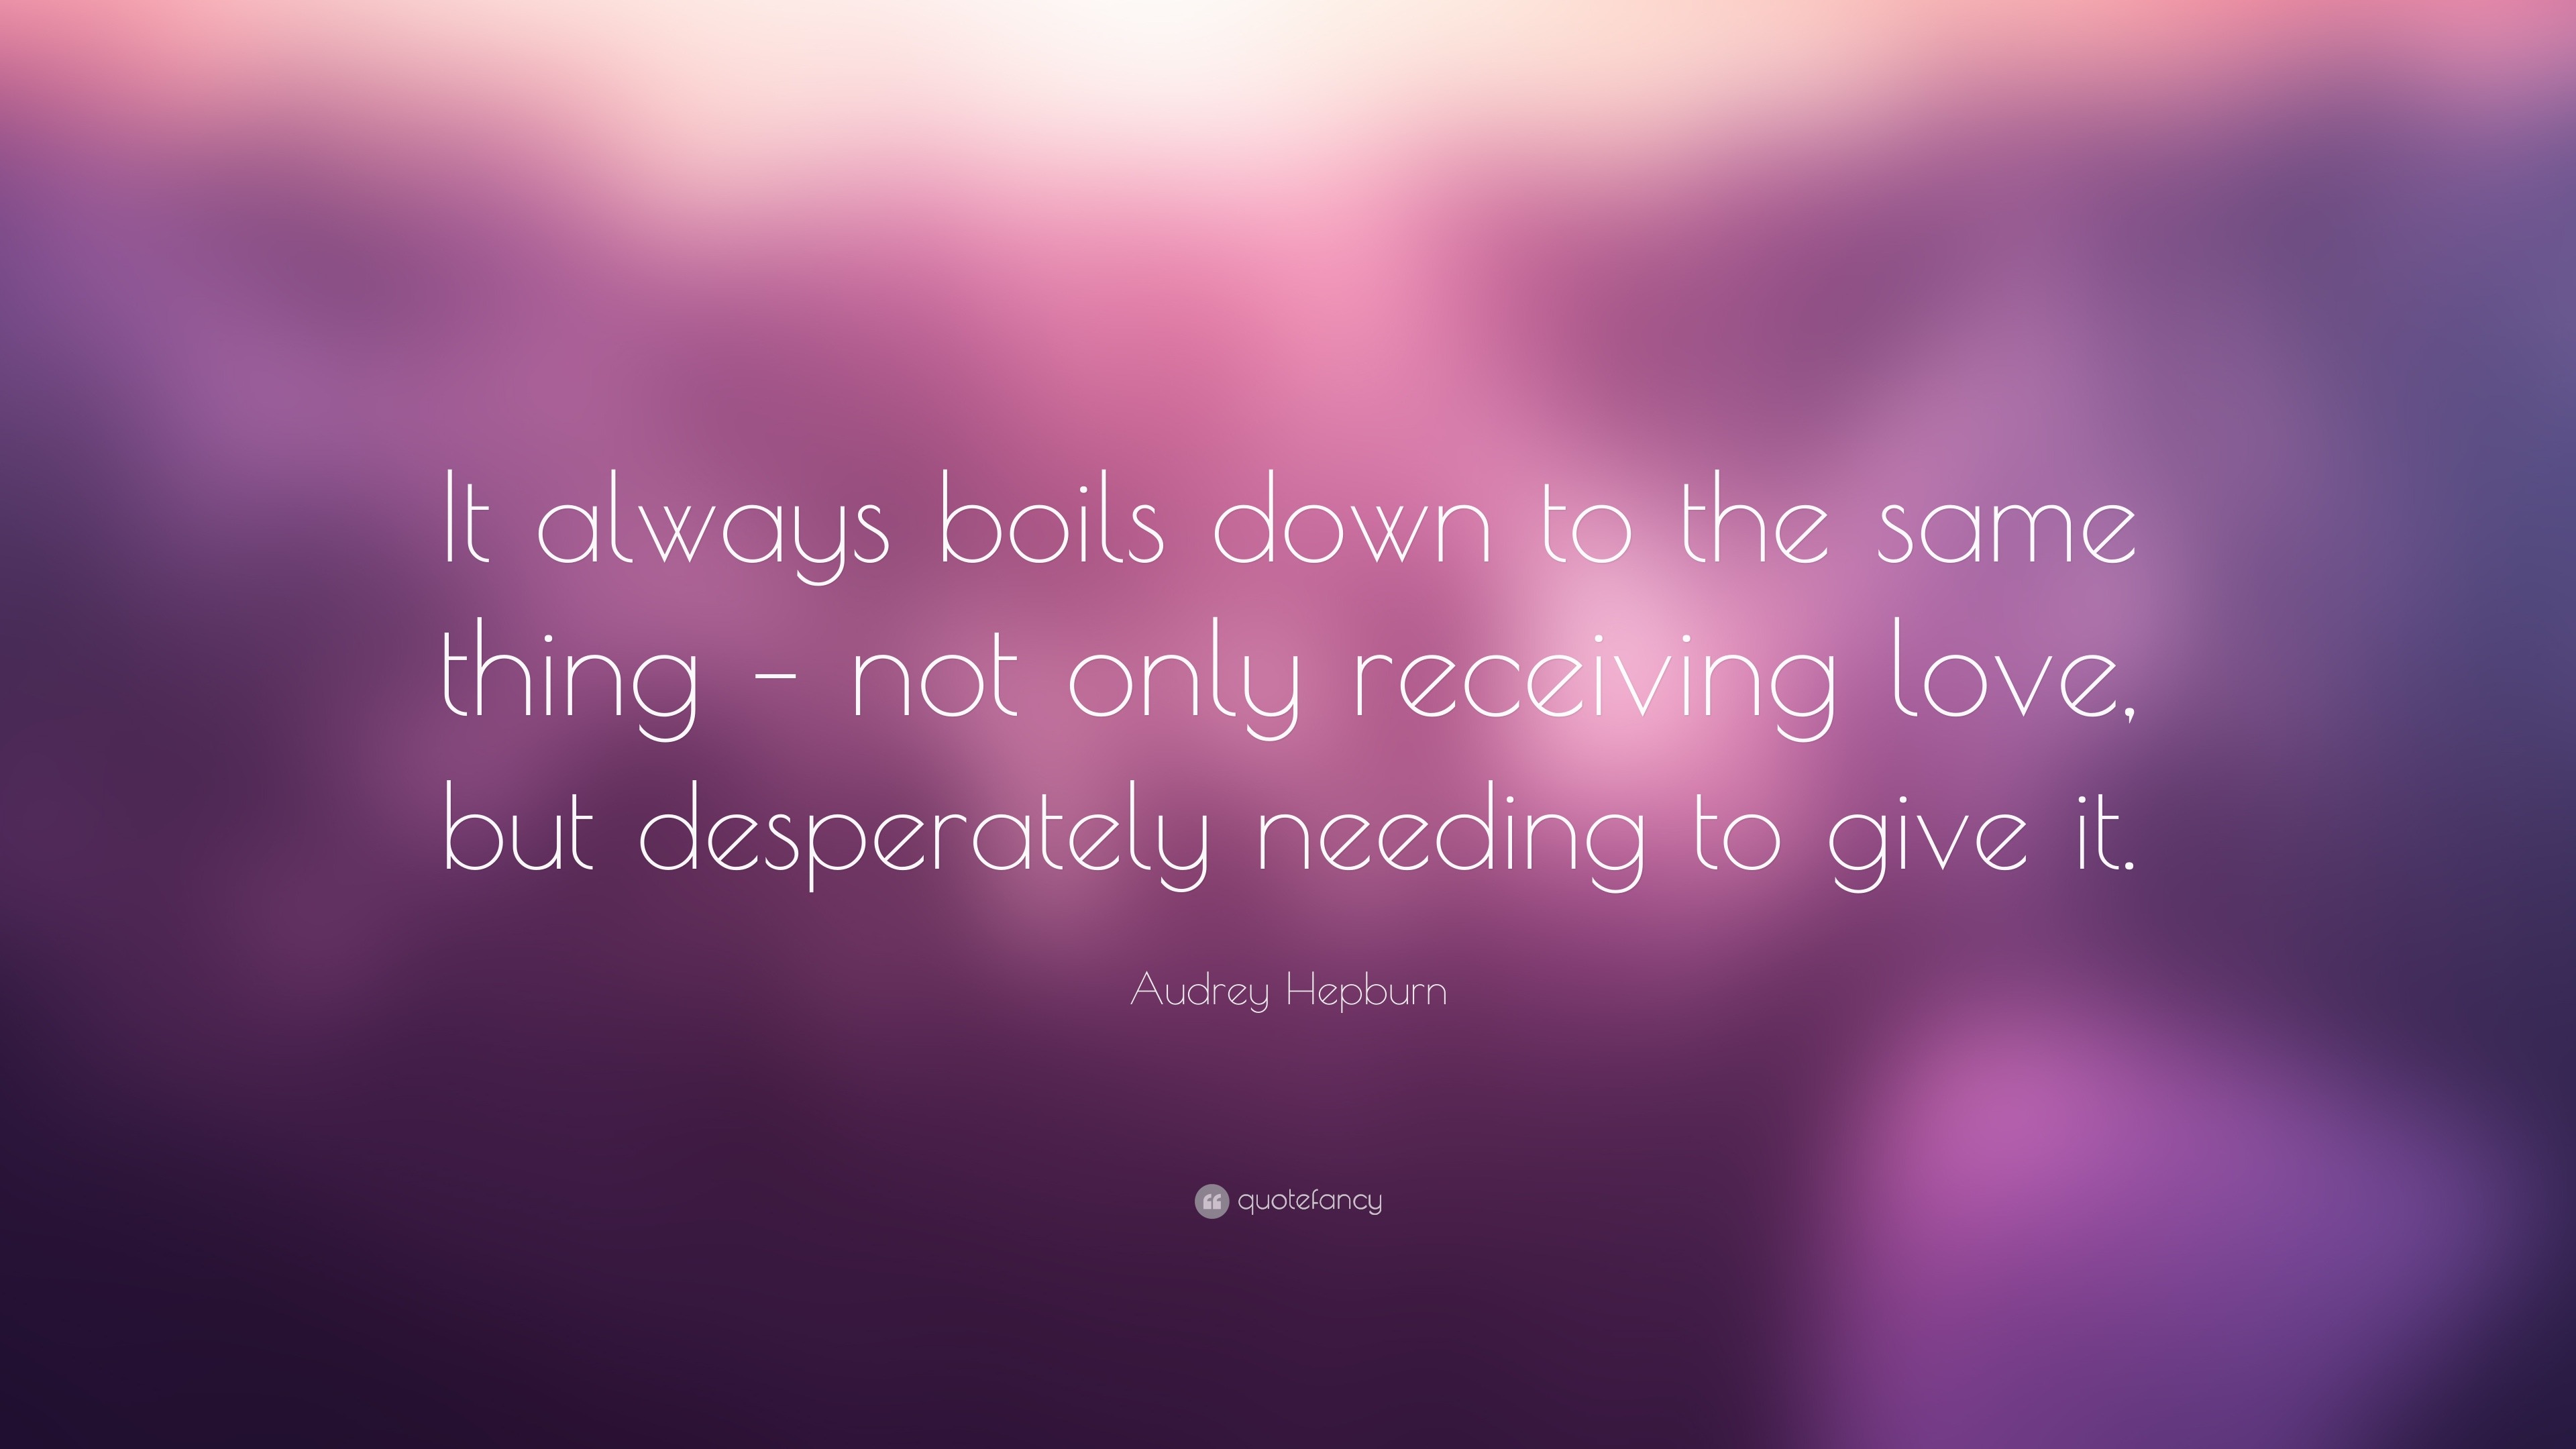 Audrey Hepburn Quote: “It always boils down to the same thing – not ...